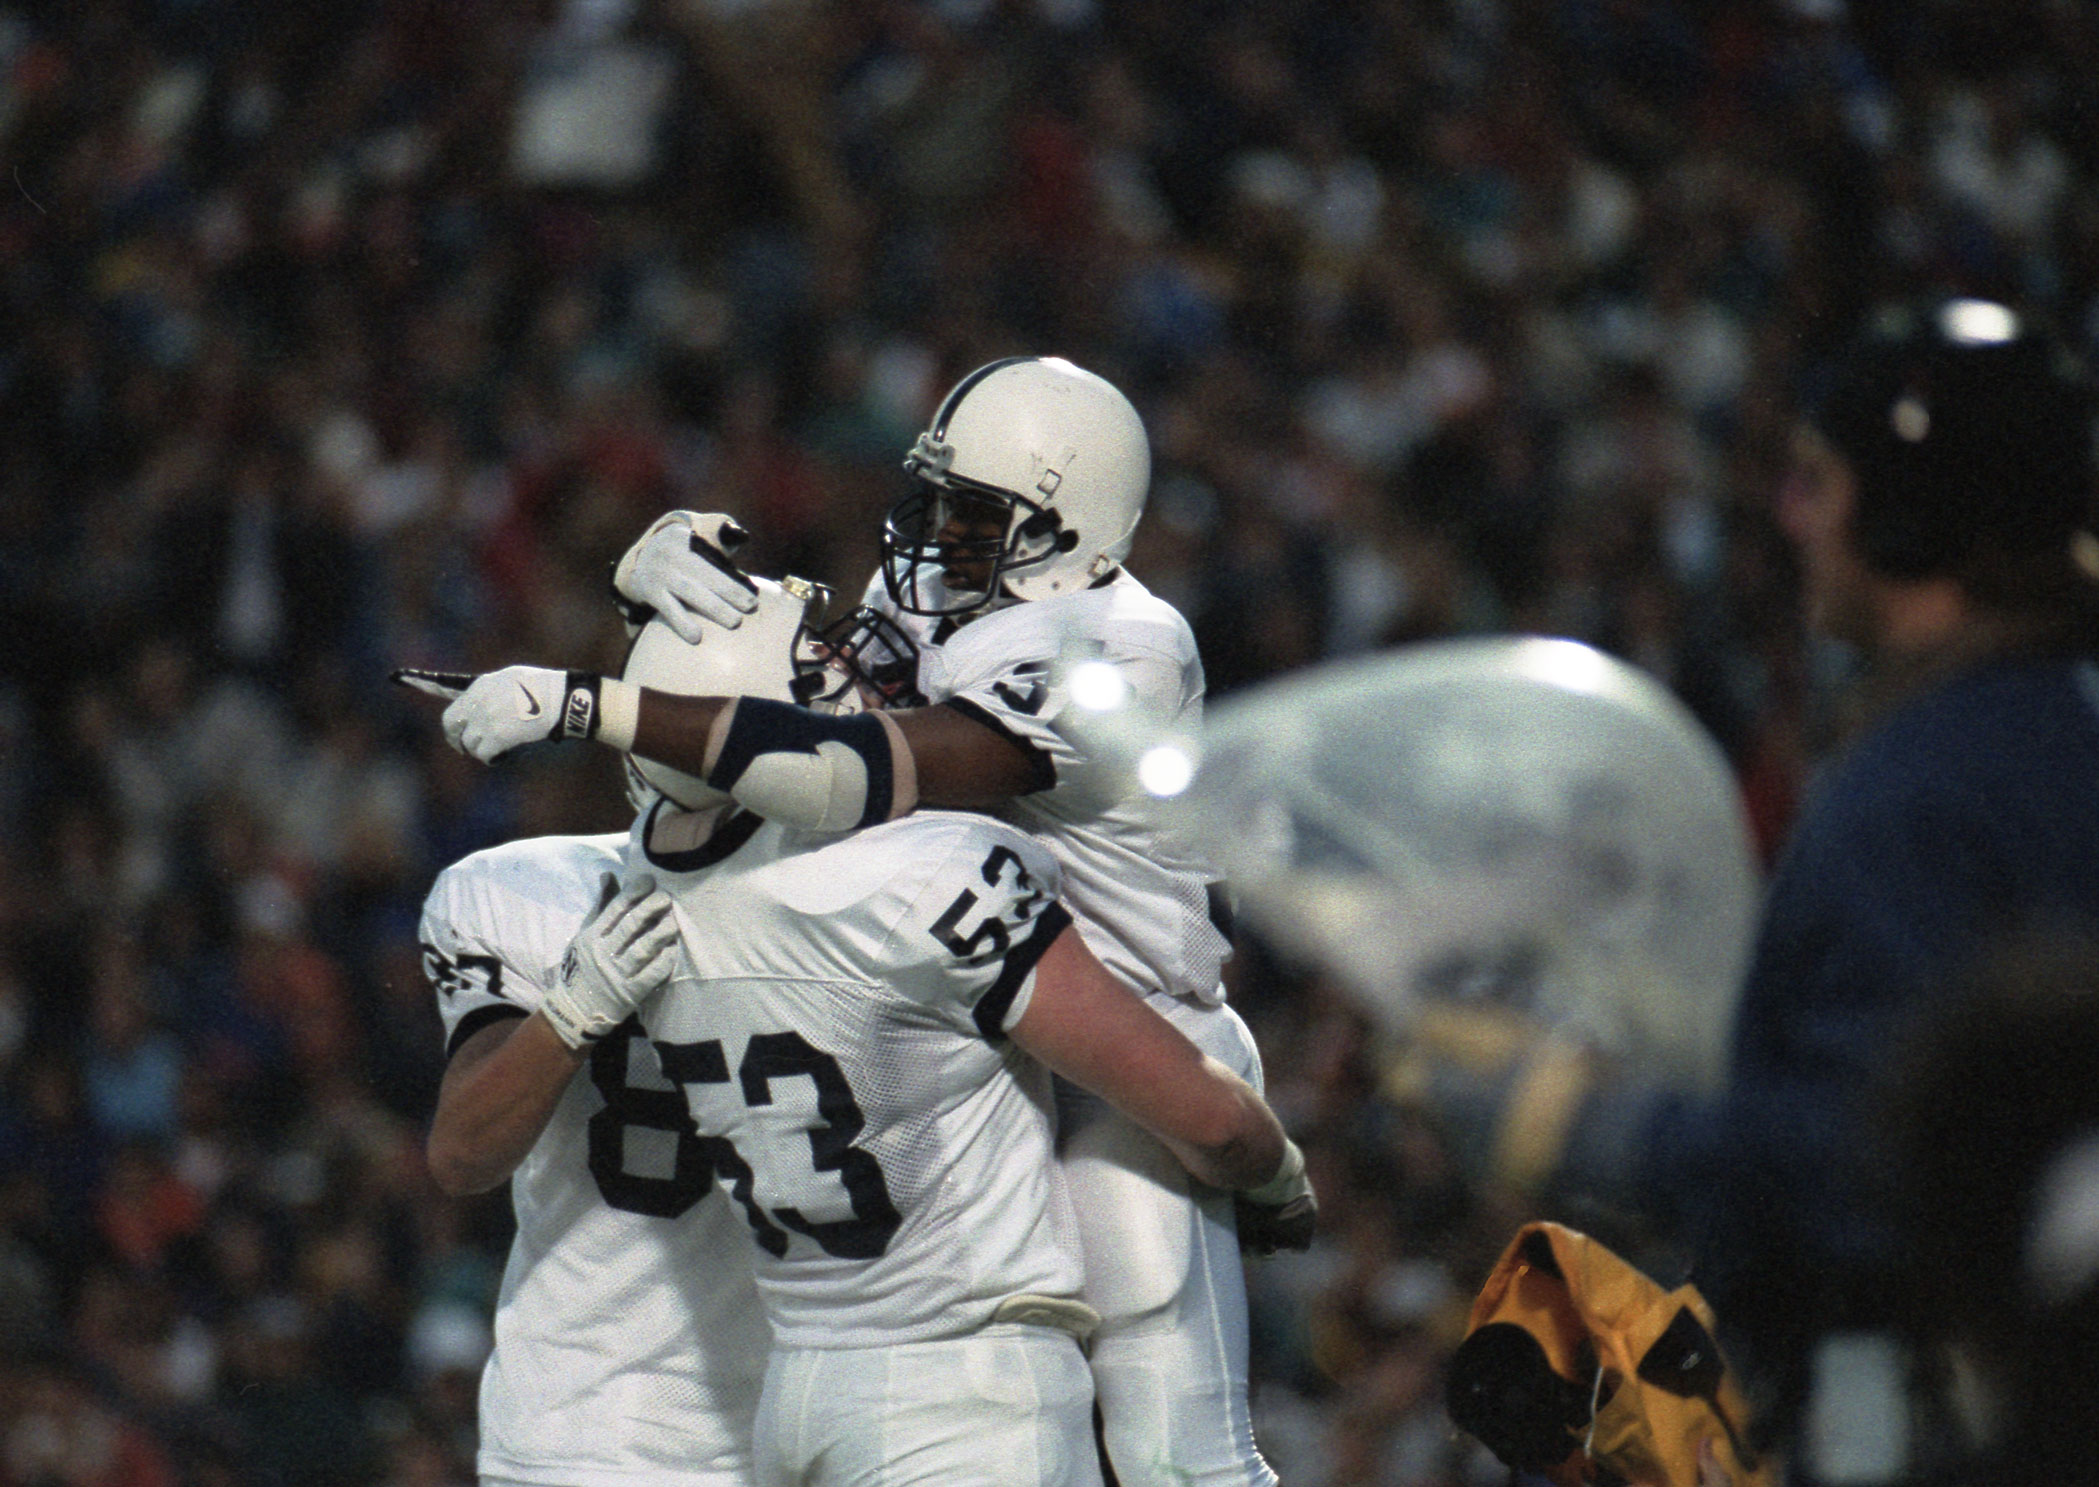 Carter celebrates with teammates after third quarter TD, photo by Curt Beamer / Blue White Illustrated